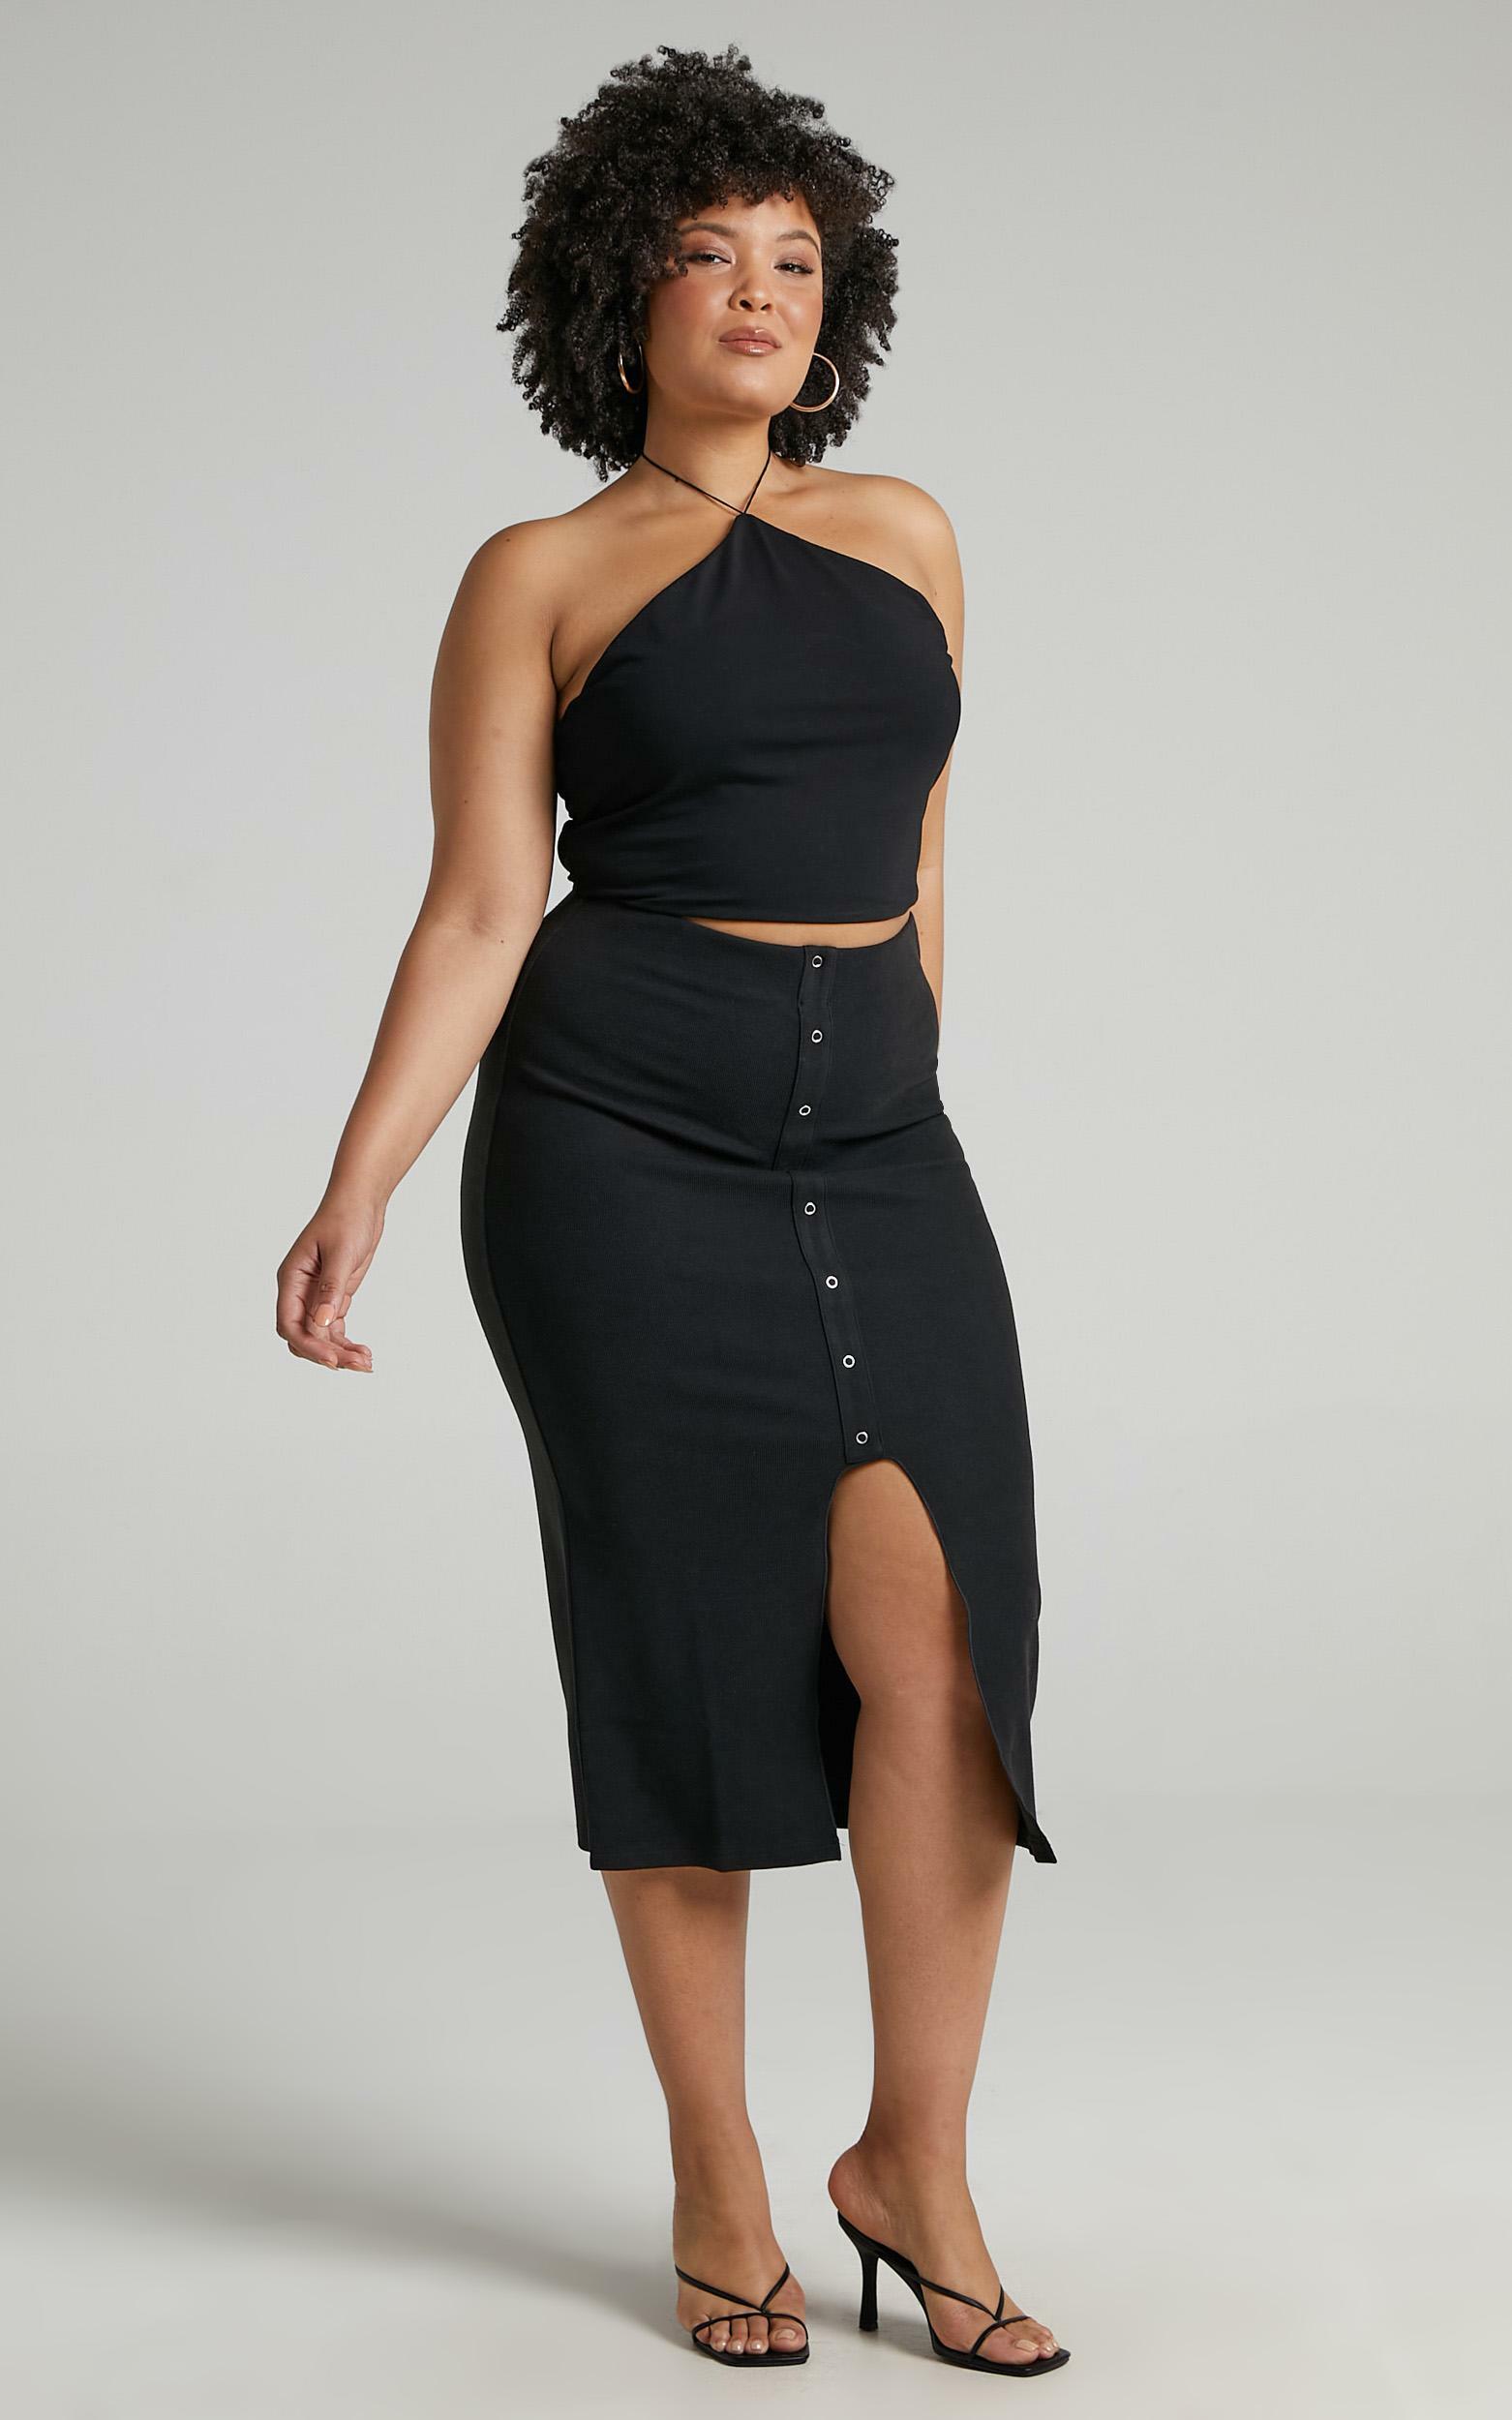 Into Motion Skirt in Black Rib - 04, BLK1, hi-res image number null